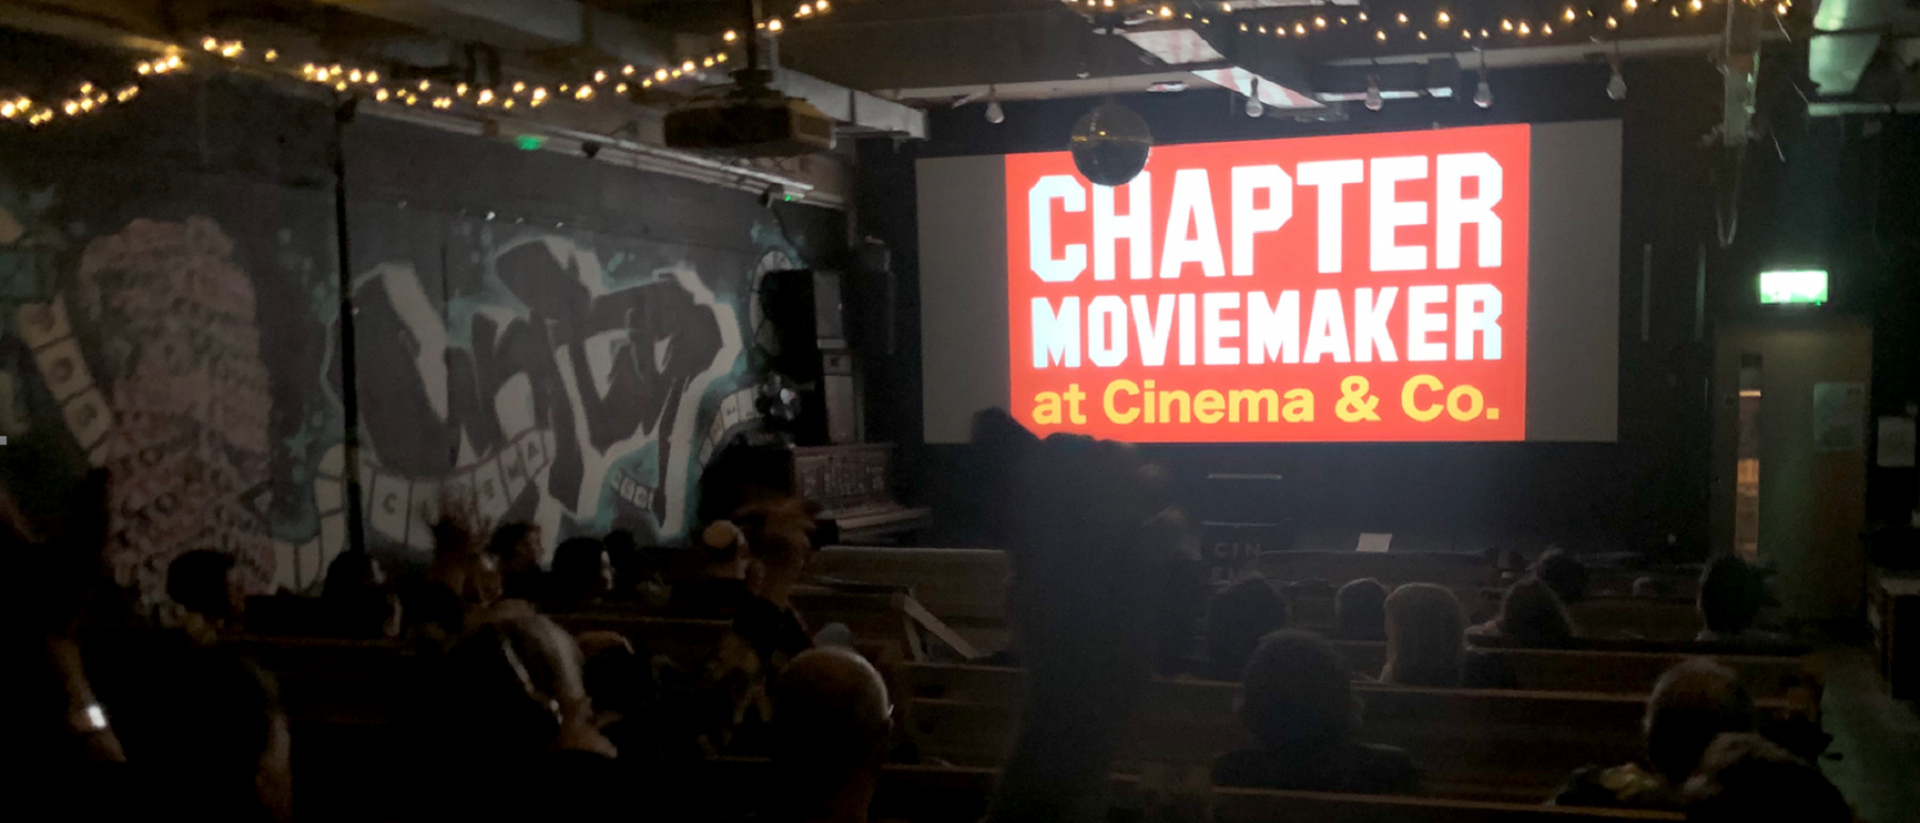 people sitting in a cinema with the chapter moviemaker logo on screen